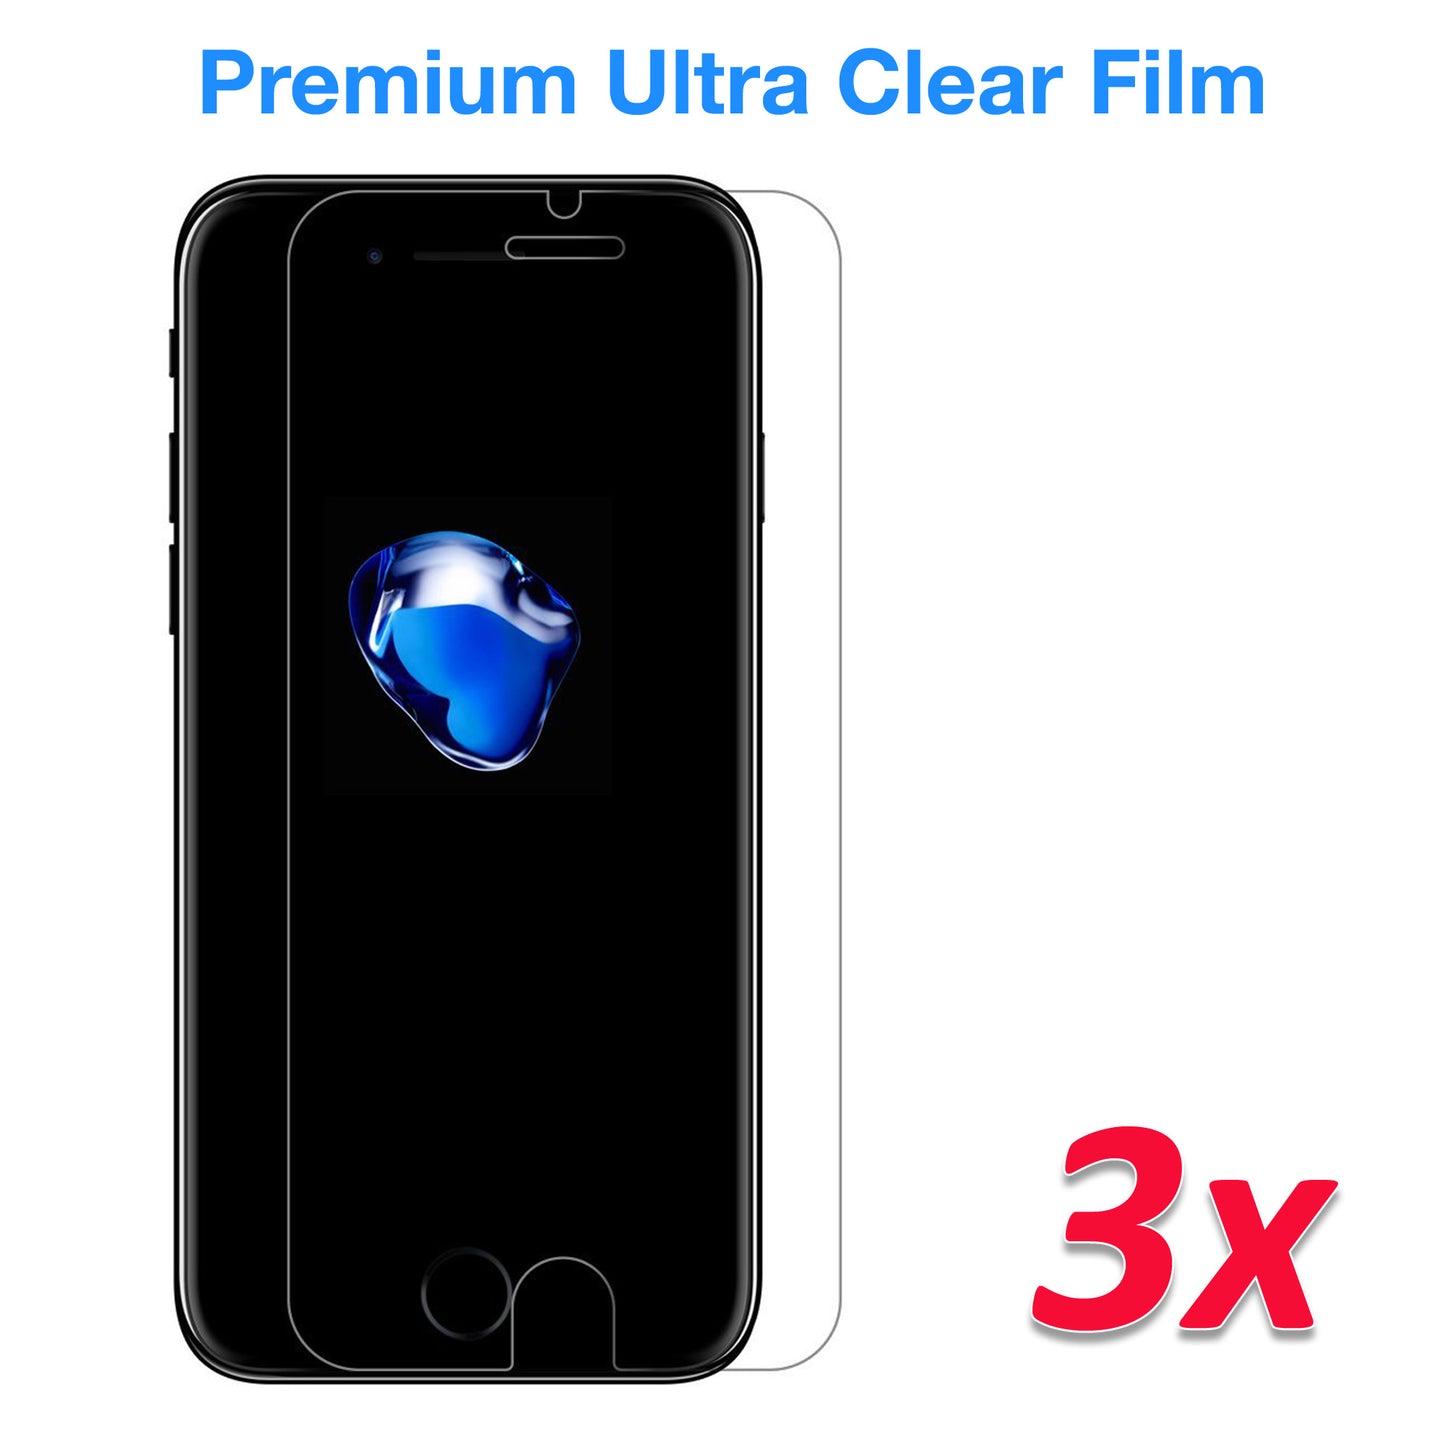 [3 Pack] MEZON Apple iPhone 8 Plus (5.5") Ultra Clear Screen Protector Case Friendly Film (iPhone 8 Plus, Clear)